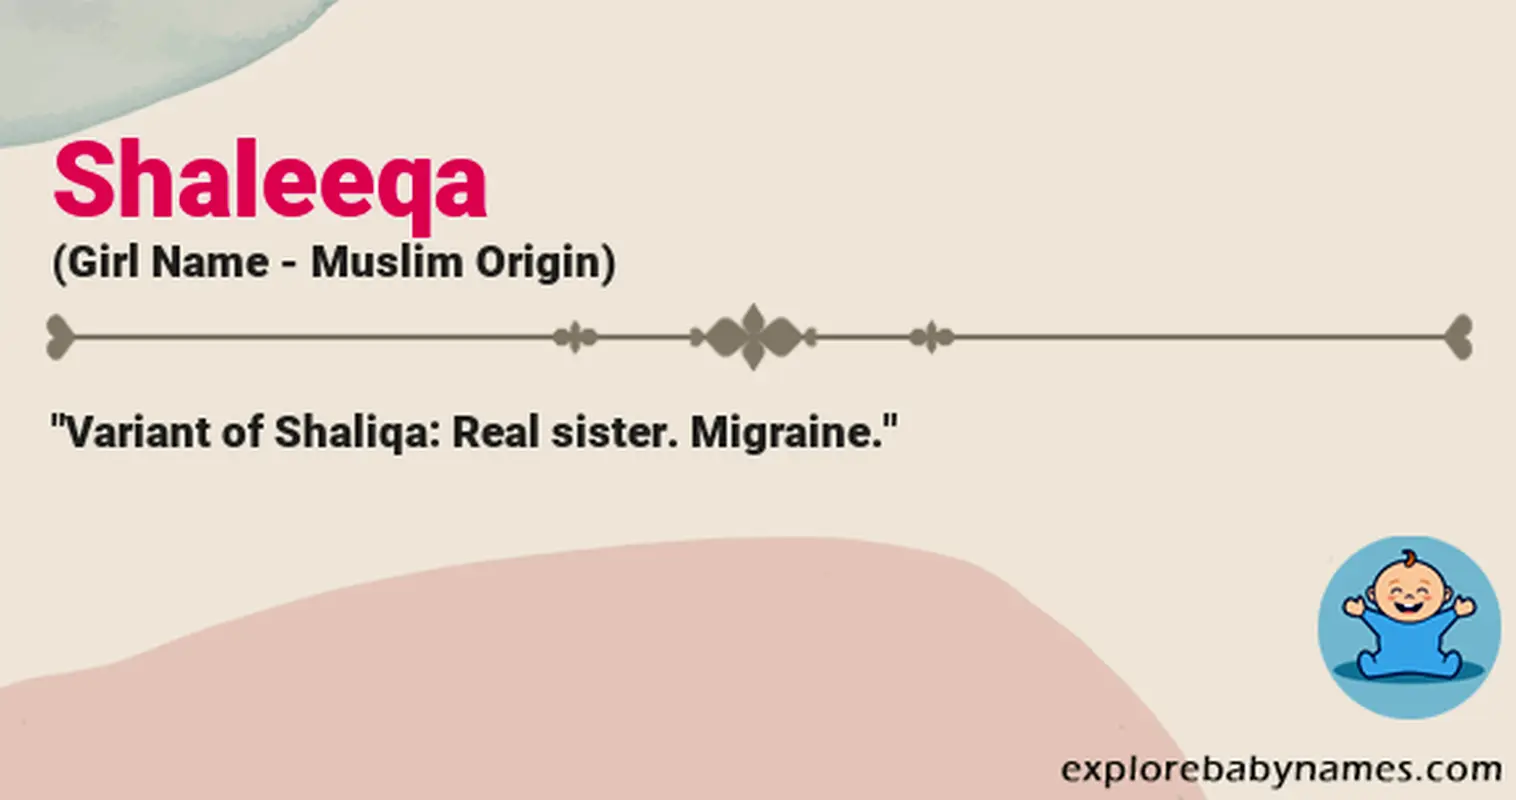 Meaning of Shaleeqa